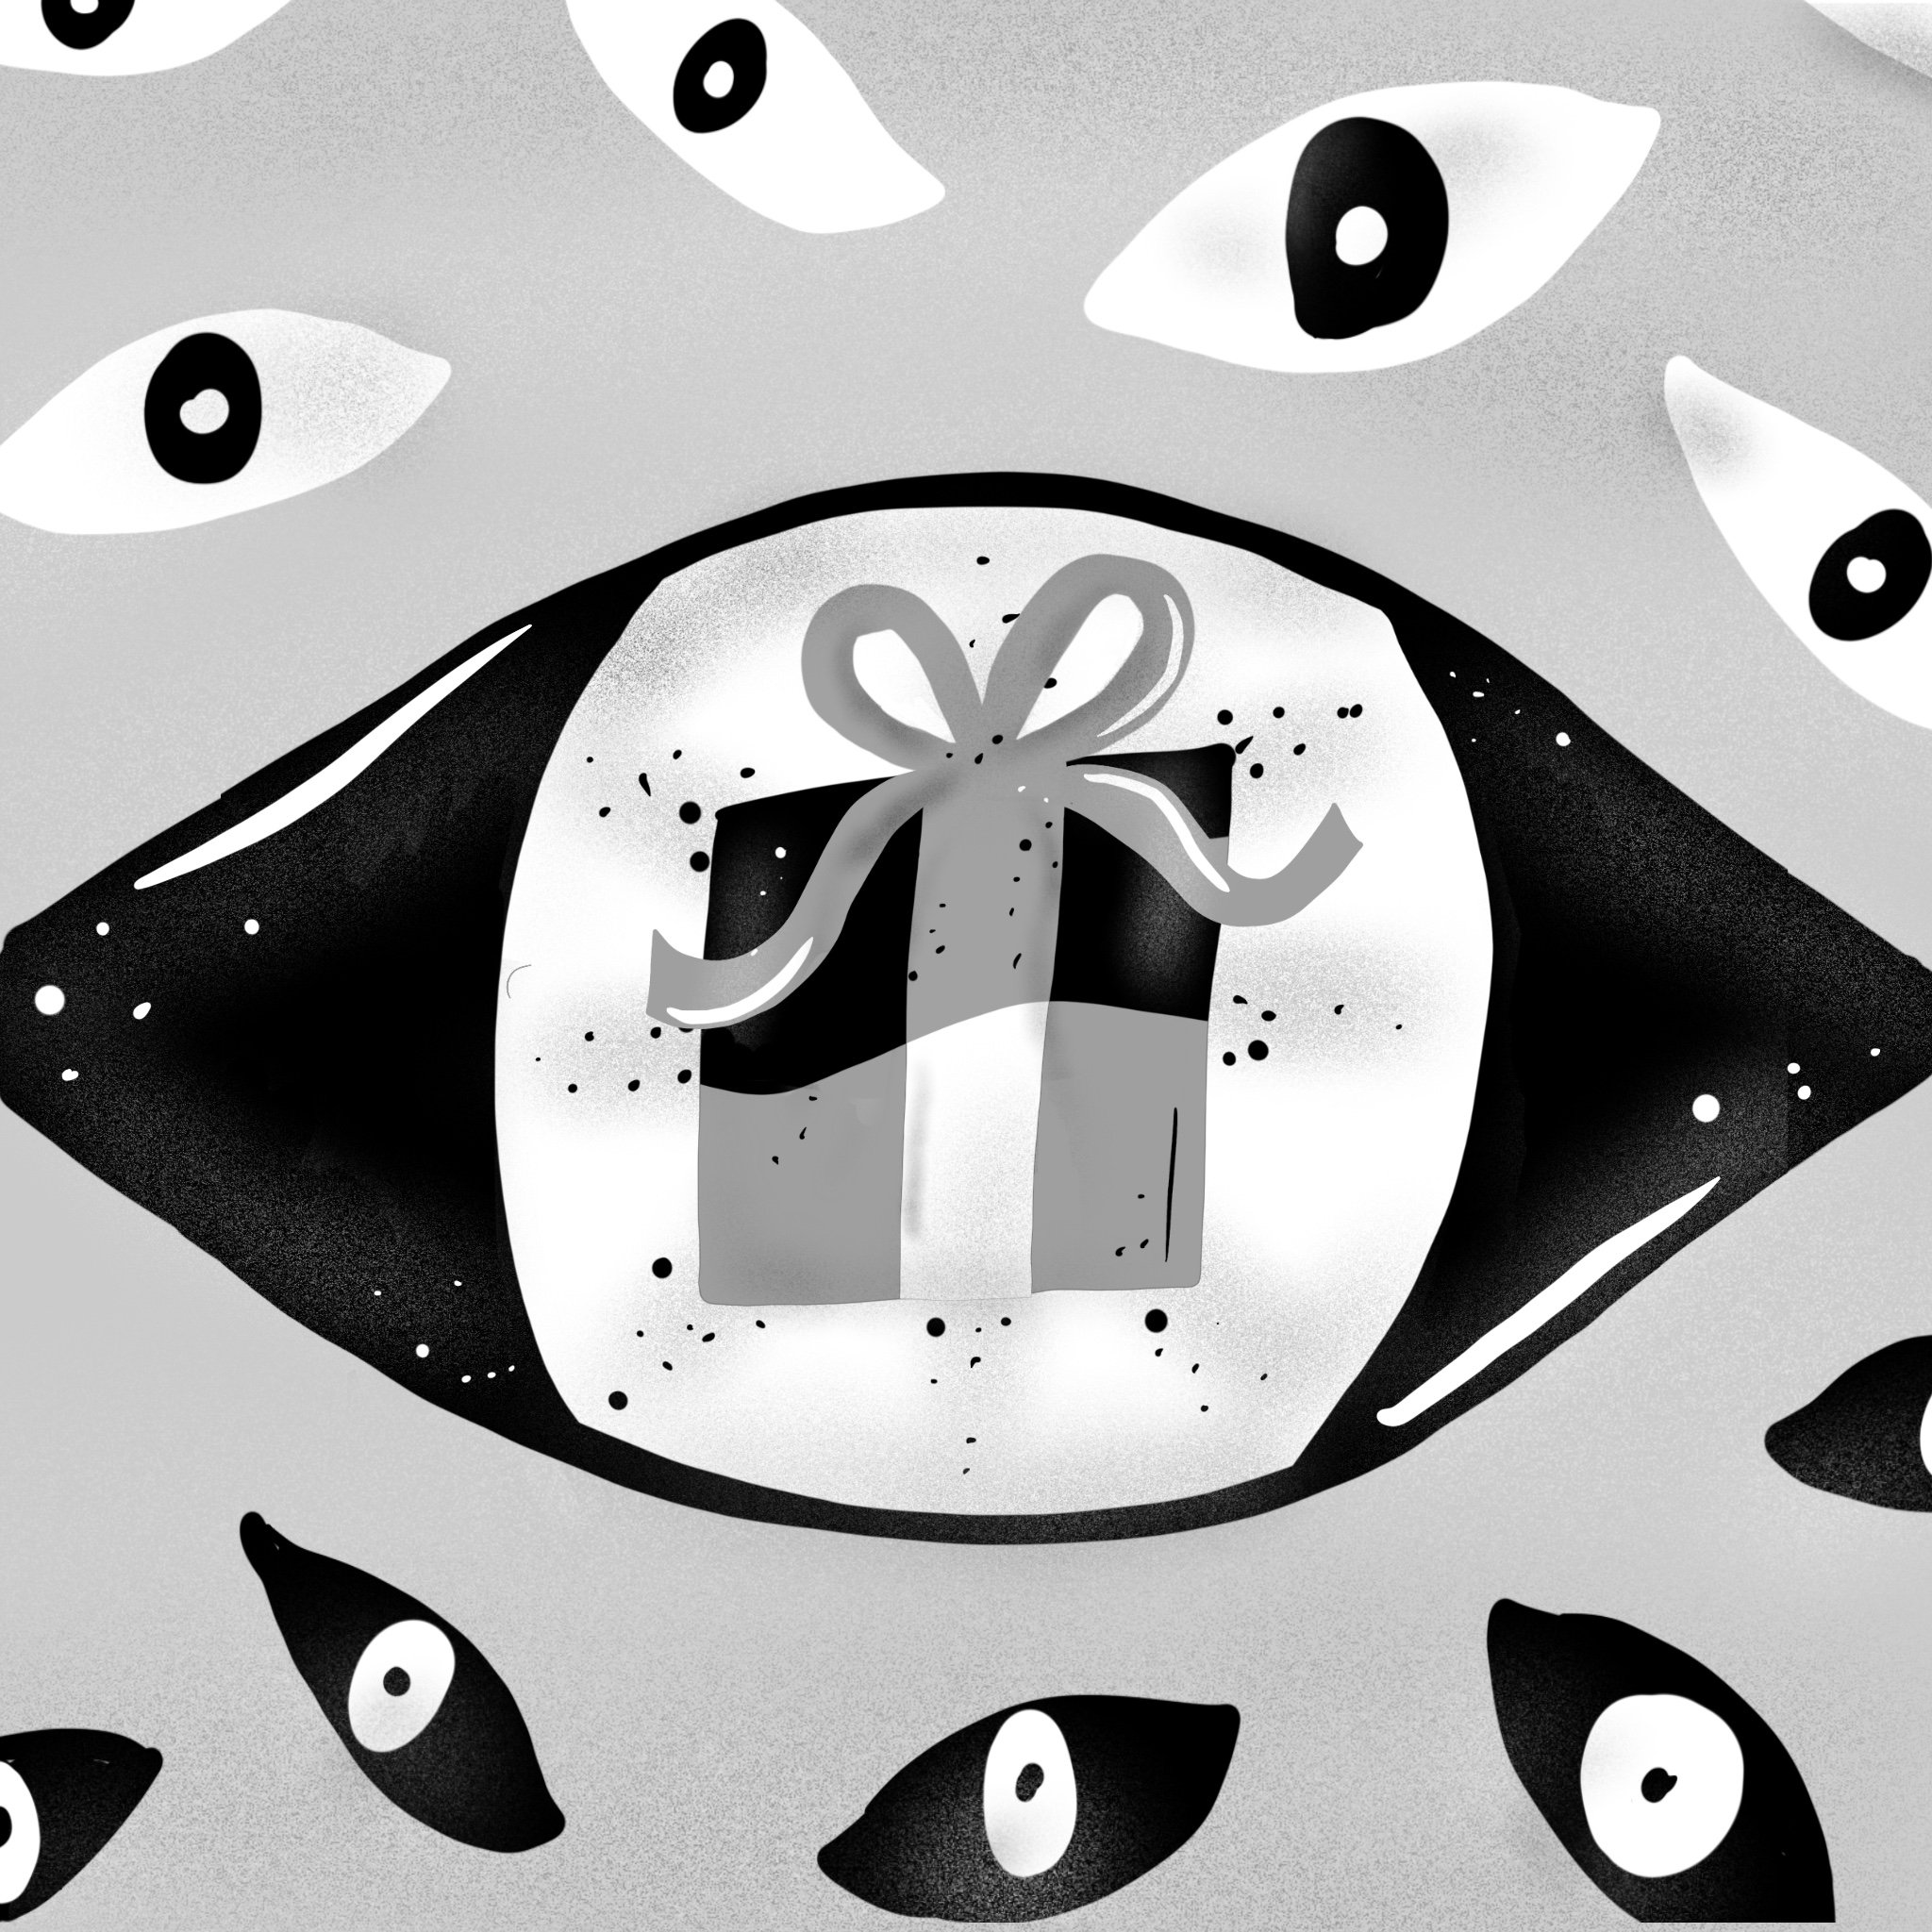 Illustration of an eye with a present in the reflection